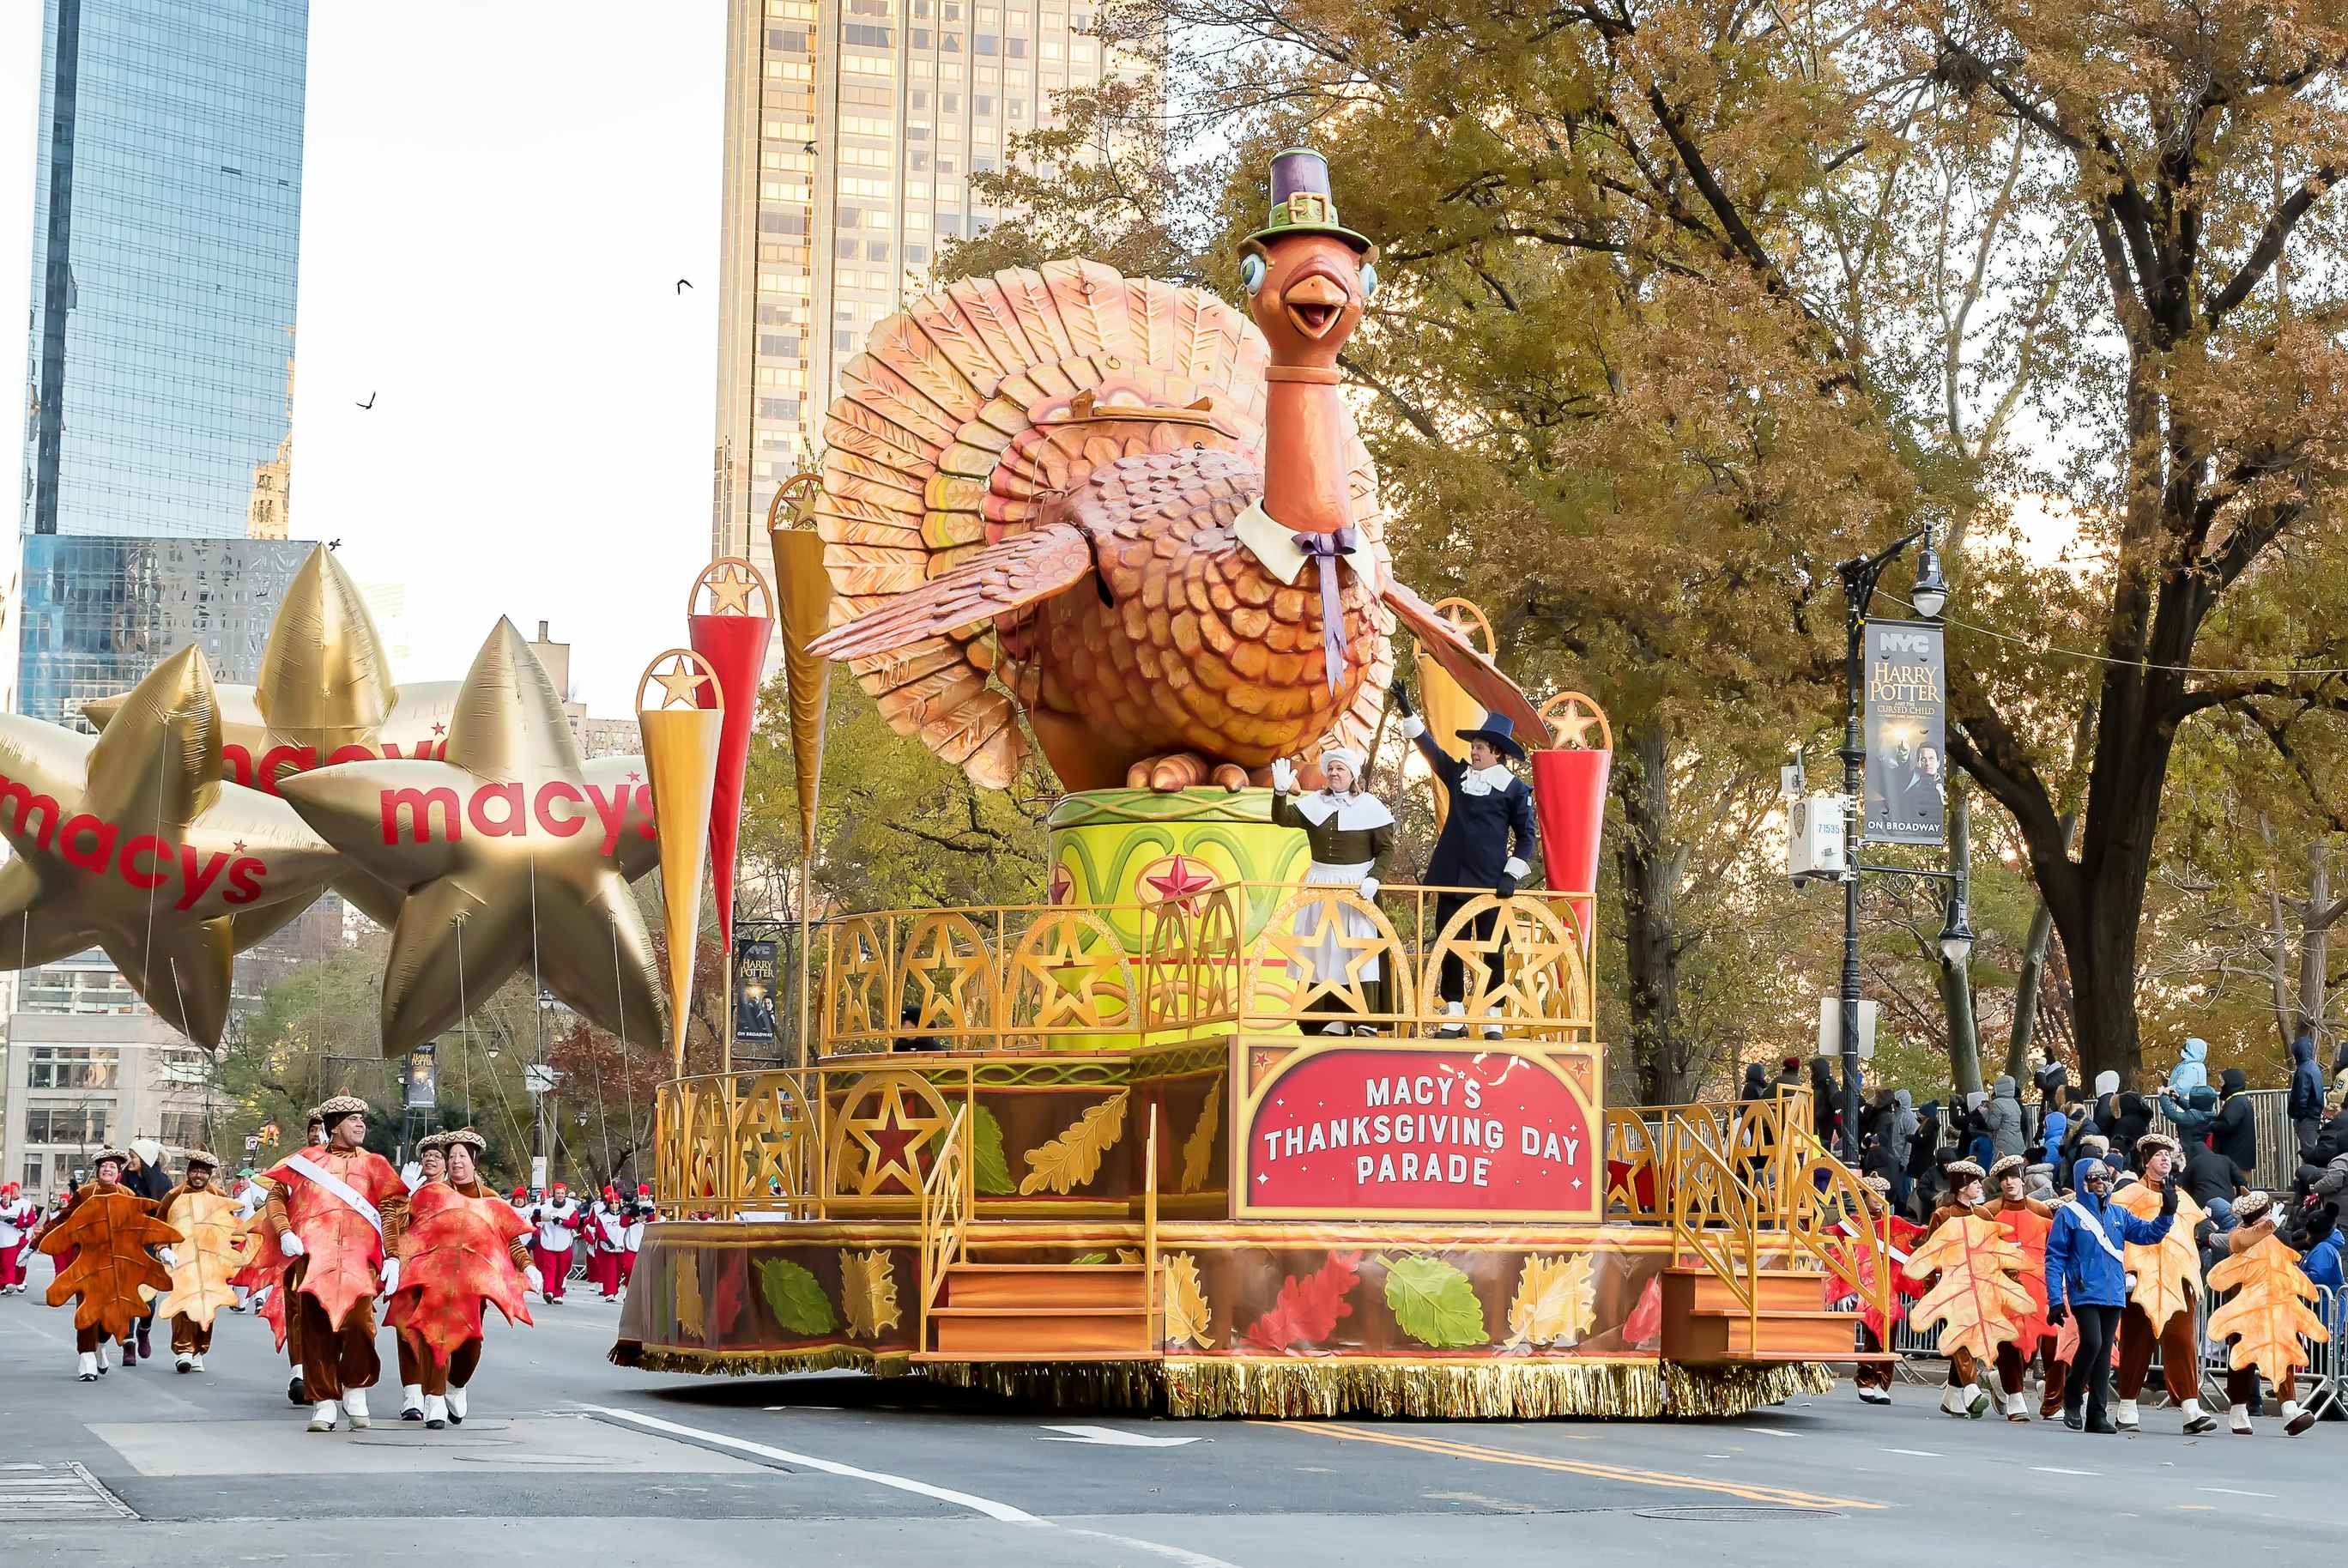 Macy's thanksgiving day parade float in the annual new york city parade